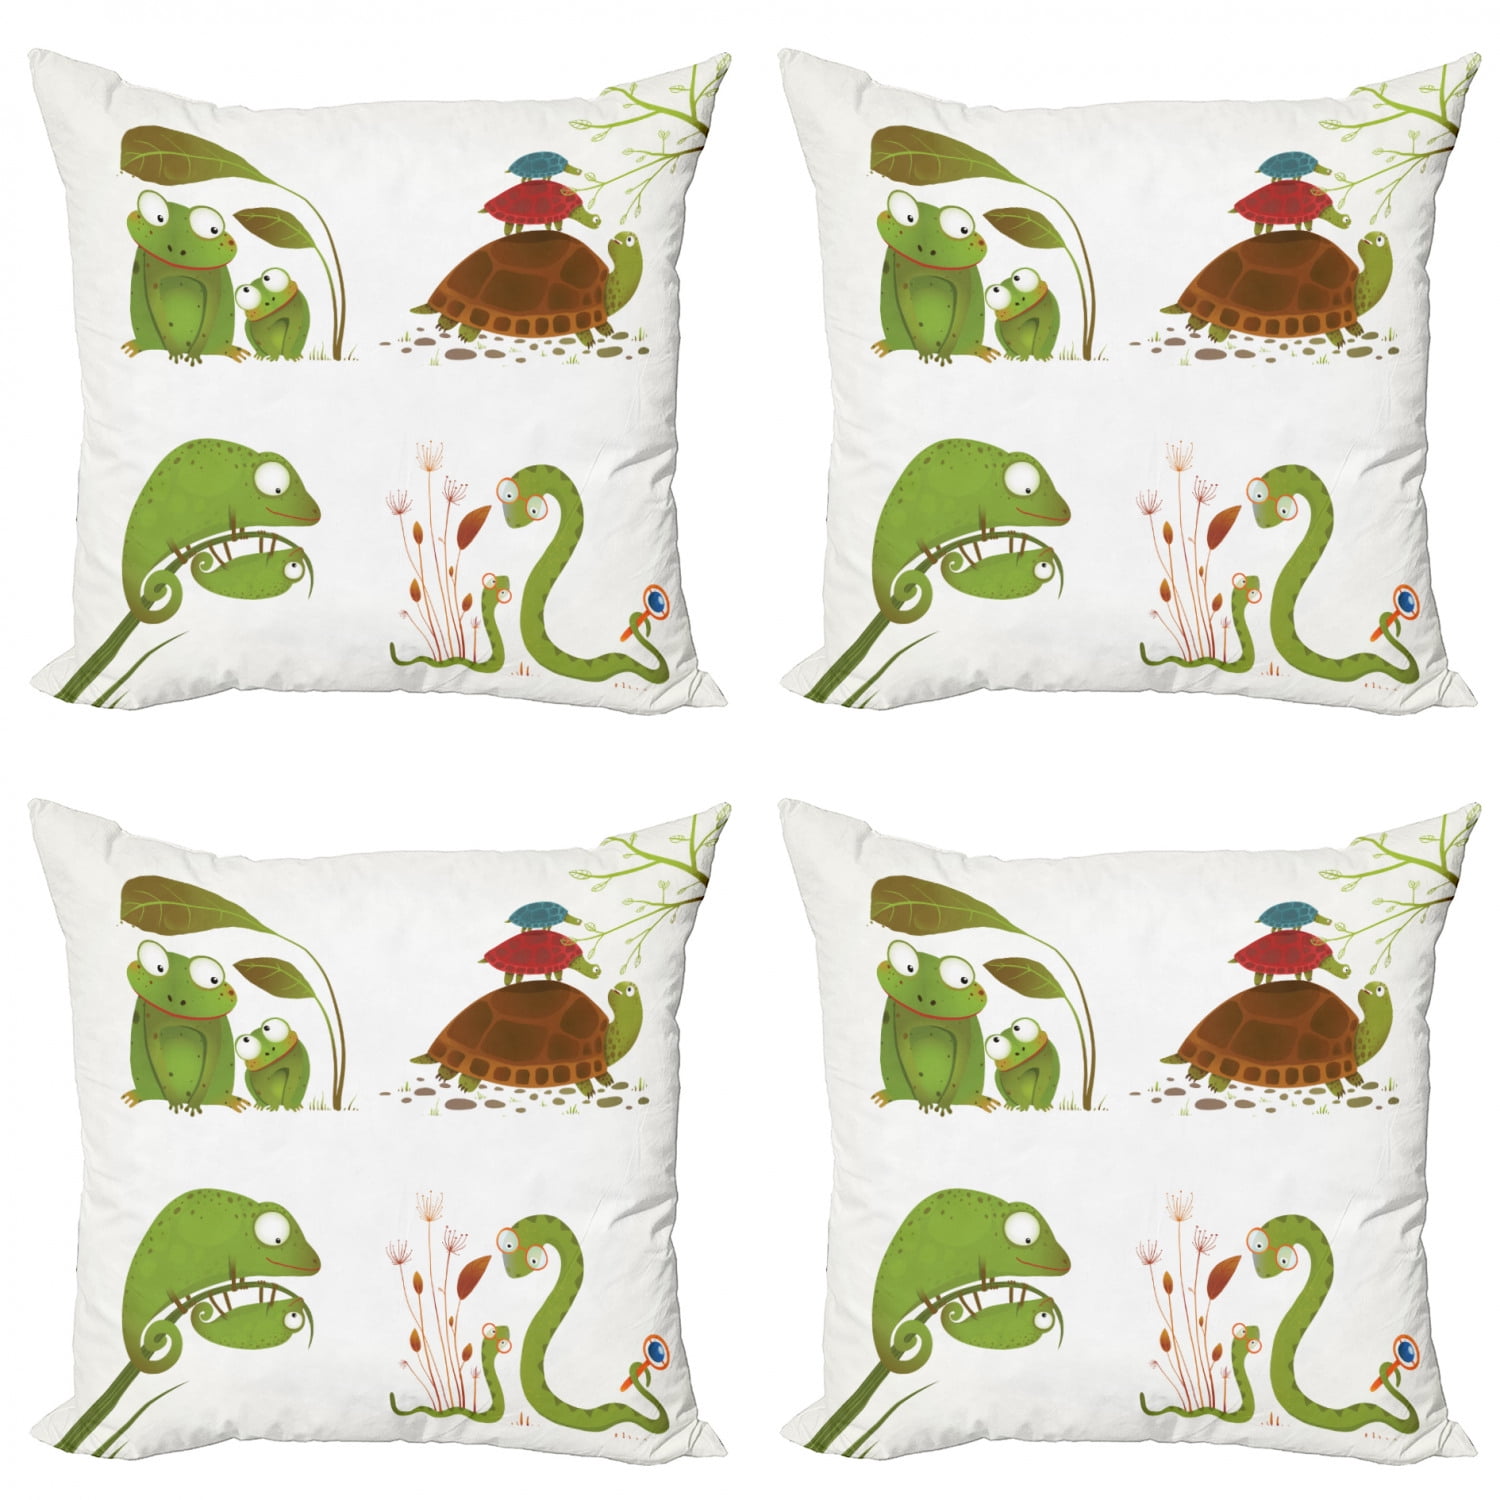 Set Of 4 Colorful Dinosaur Decorative Throw Pillow Covers 12x12 Inch Linen Square Dino Dino Pillow Cases Animal Pattern Cushion Covers Kids Outdoor Sofa and Home Decor Pillow Protectors 12 by 12 